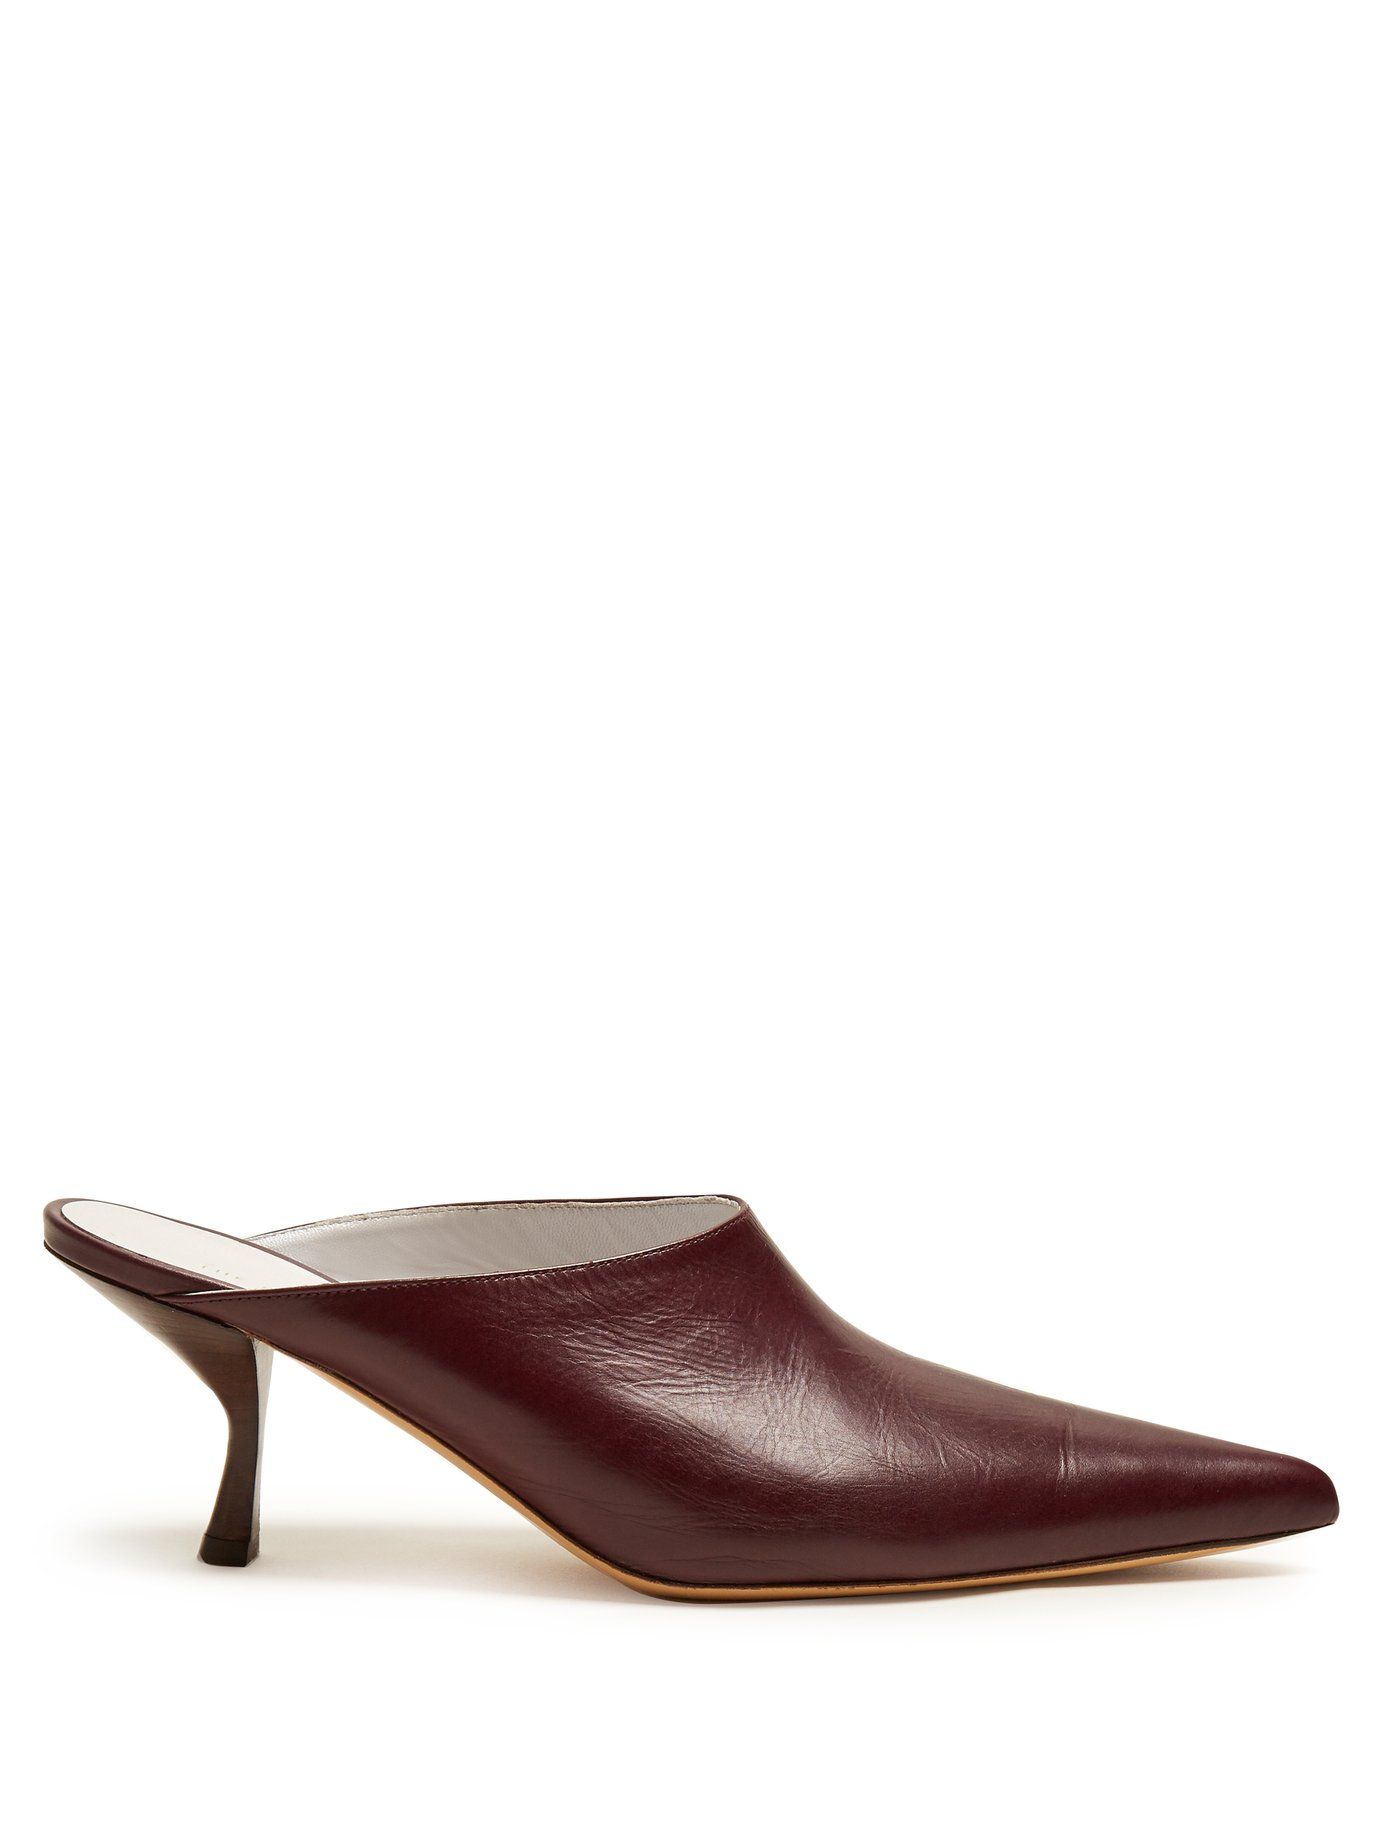 The Best Pointed-Toe Mules for Fall | Who What Wear